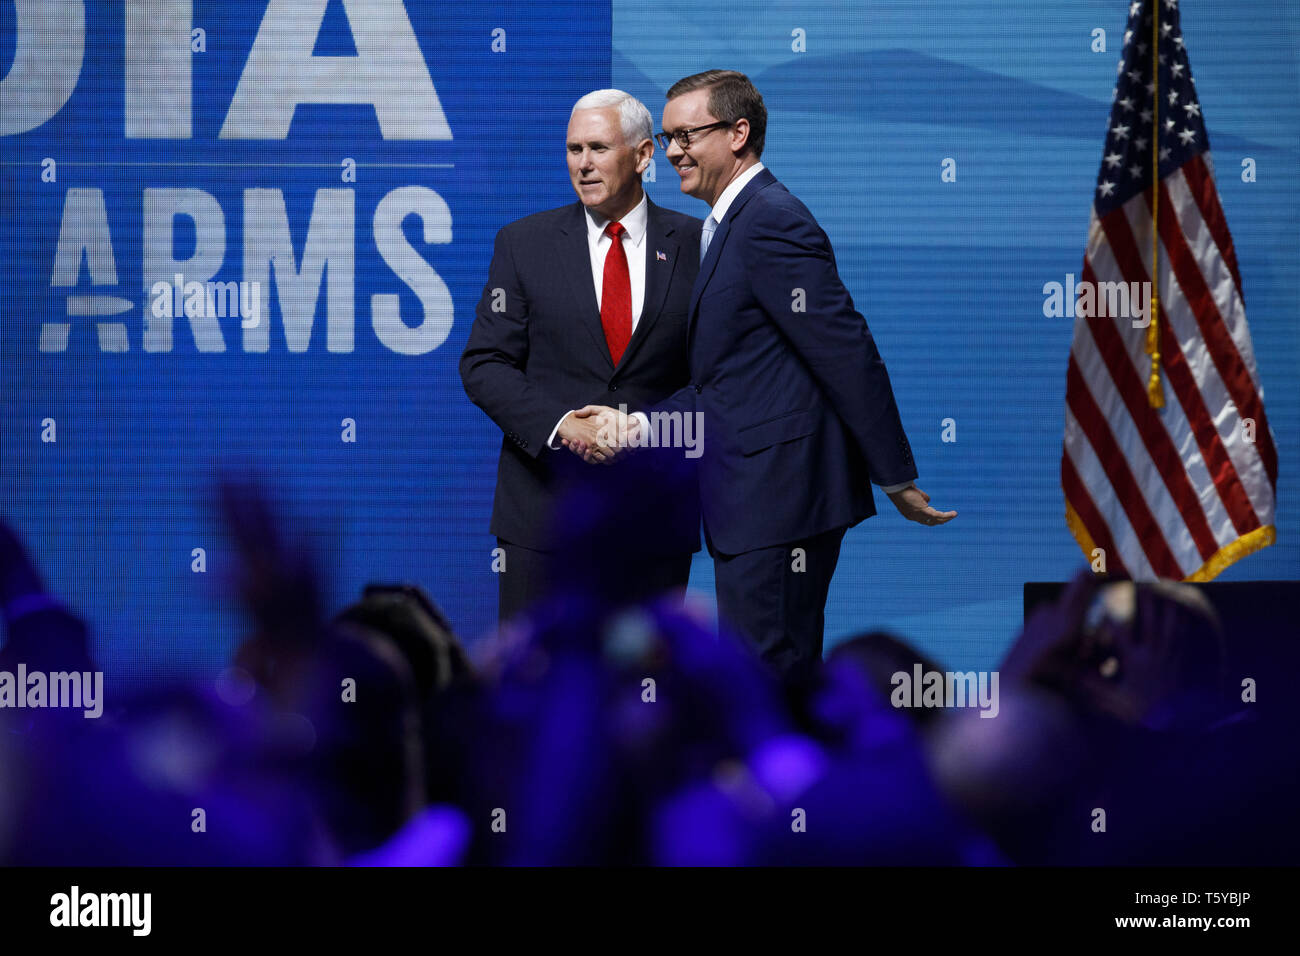 May 4, 2018 - Dallas, Texas, U.S. - Vice President Mike Pence shakes hands with Chris W. Cox, executive director of the NRA Institute for Legislative Action, during the National Rifle Association (NRA) annual meeting leadership forum on Friday, May 4, 2018 in Dallas, Texas.. Â© 2018 Patrick T. Fallon (Credit Image: © Patrick Fallon/ZUMA Wire) Stock Photo